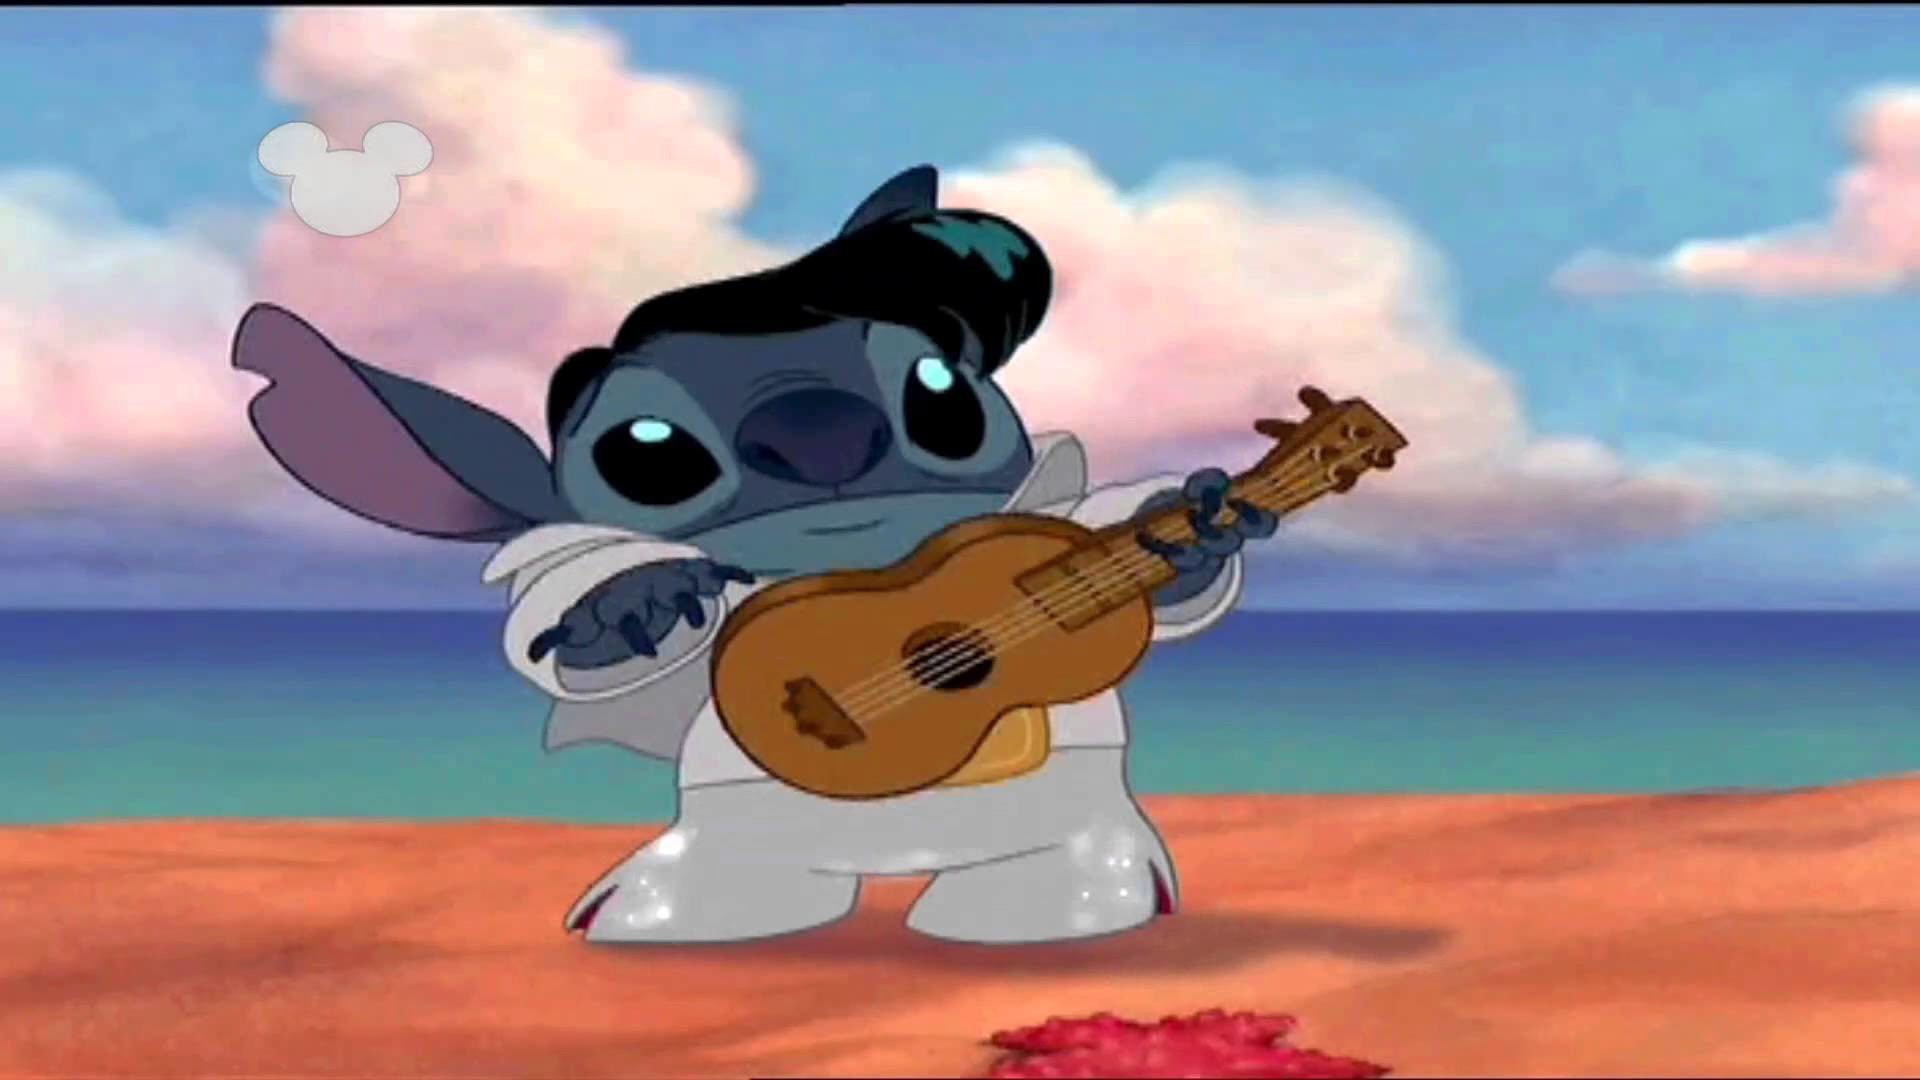 1920x1080 "Number 1 is dancing" from Lilo and Stitch - YouTube